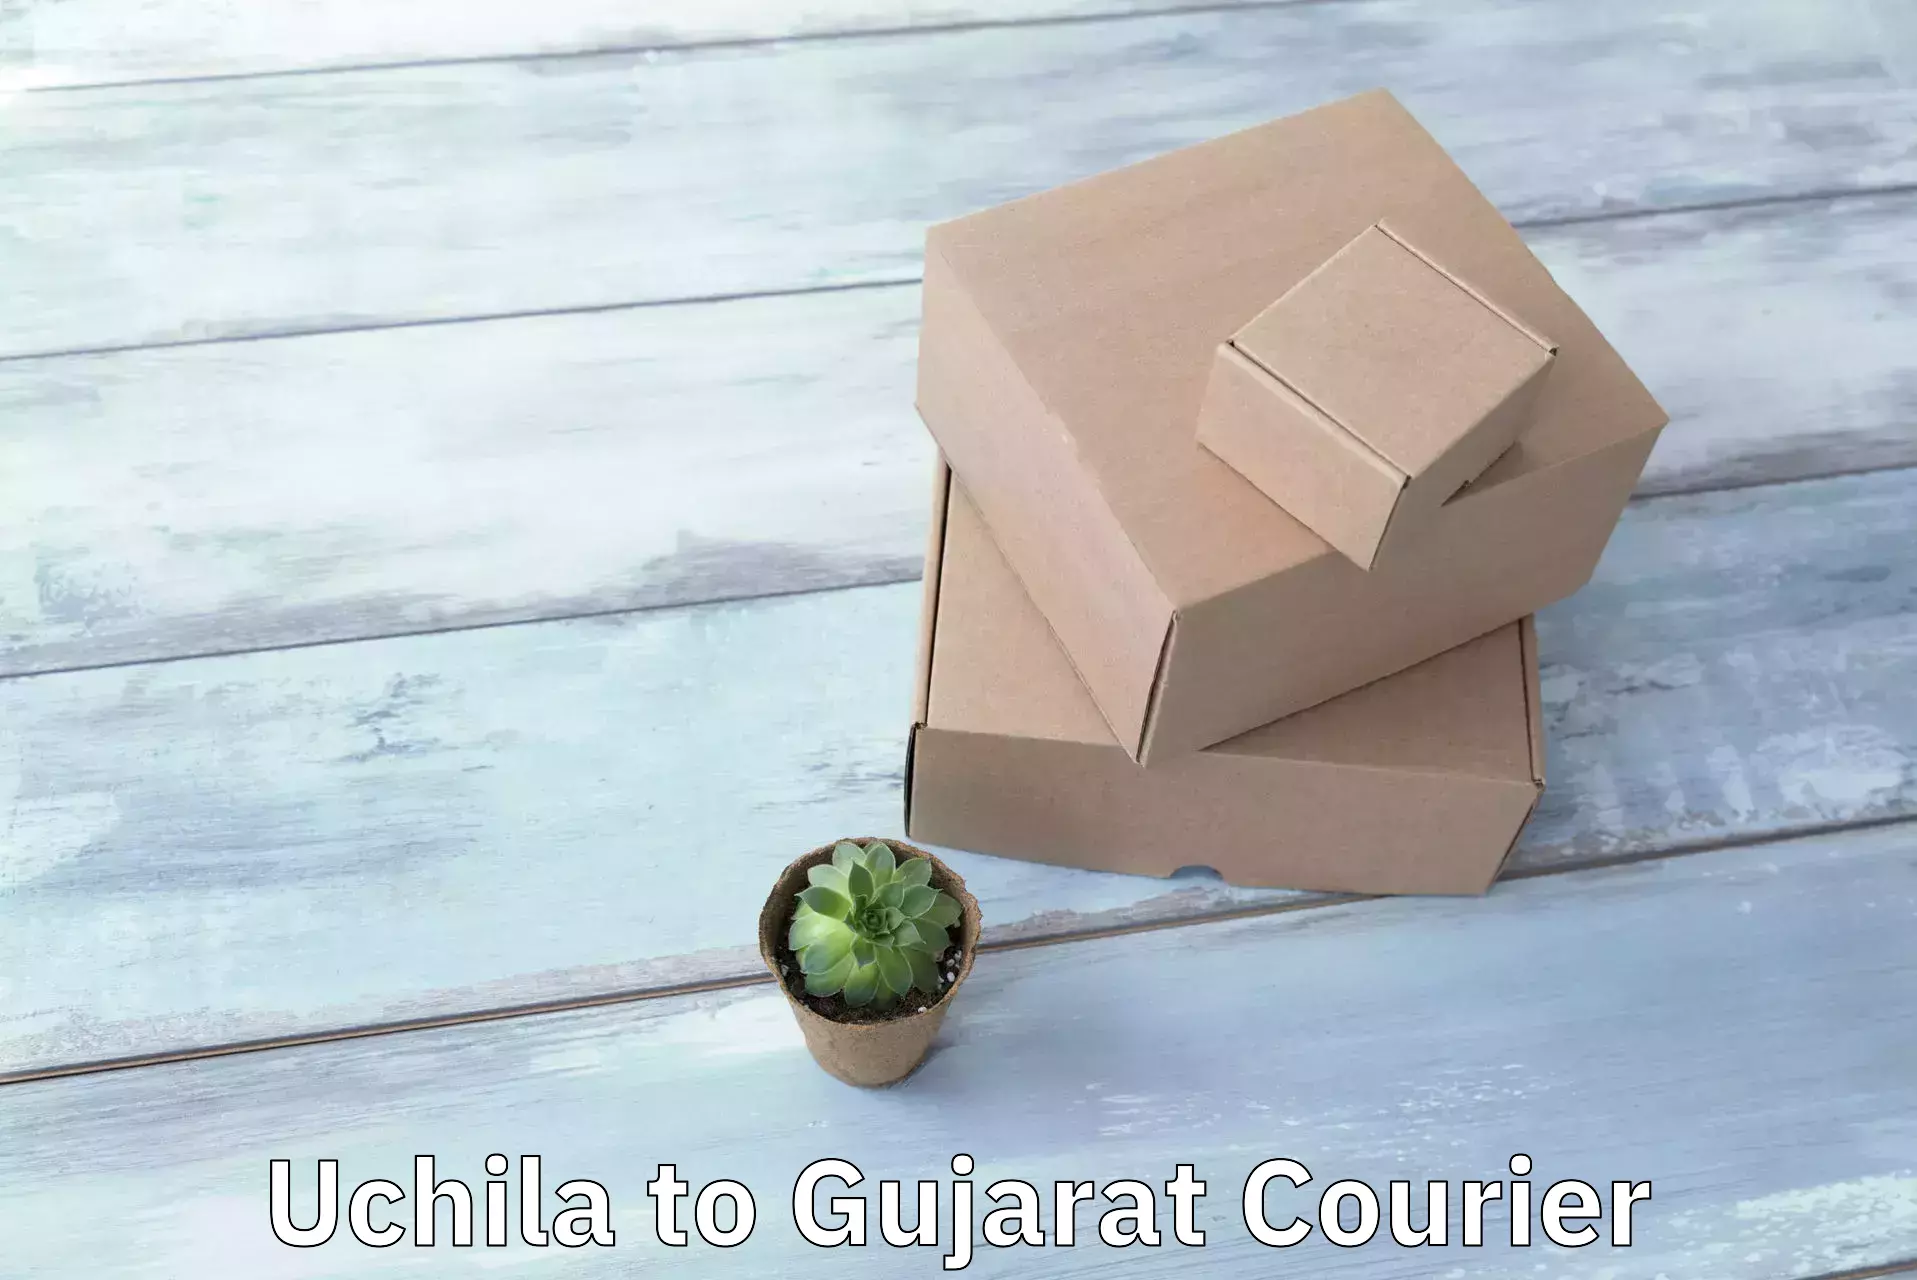 Quality courier services Uchila to Ahmedabad